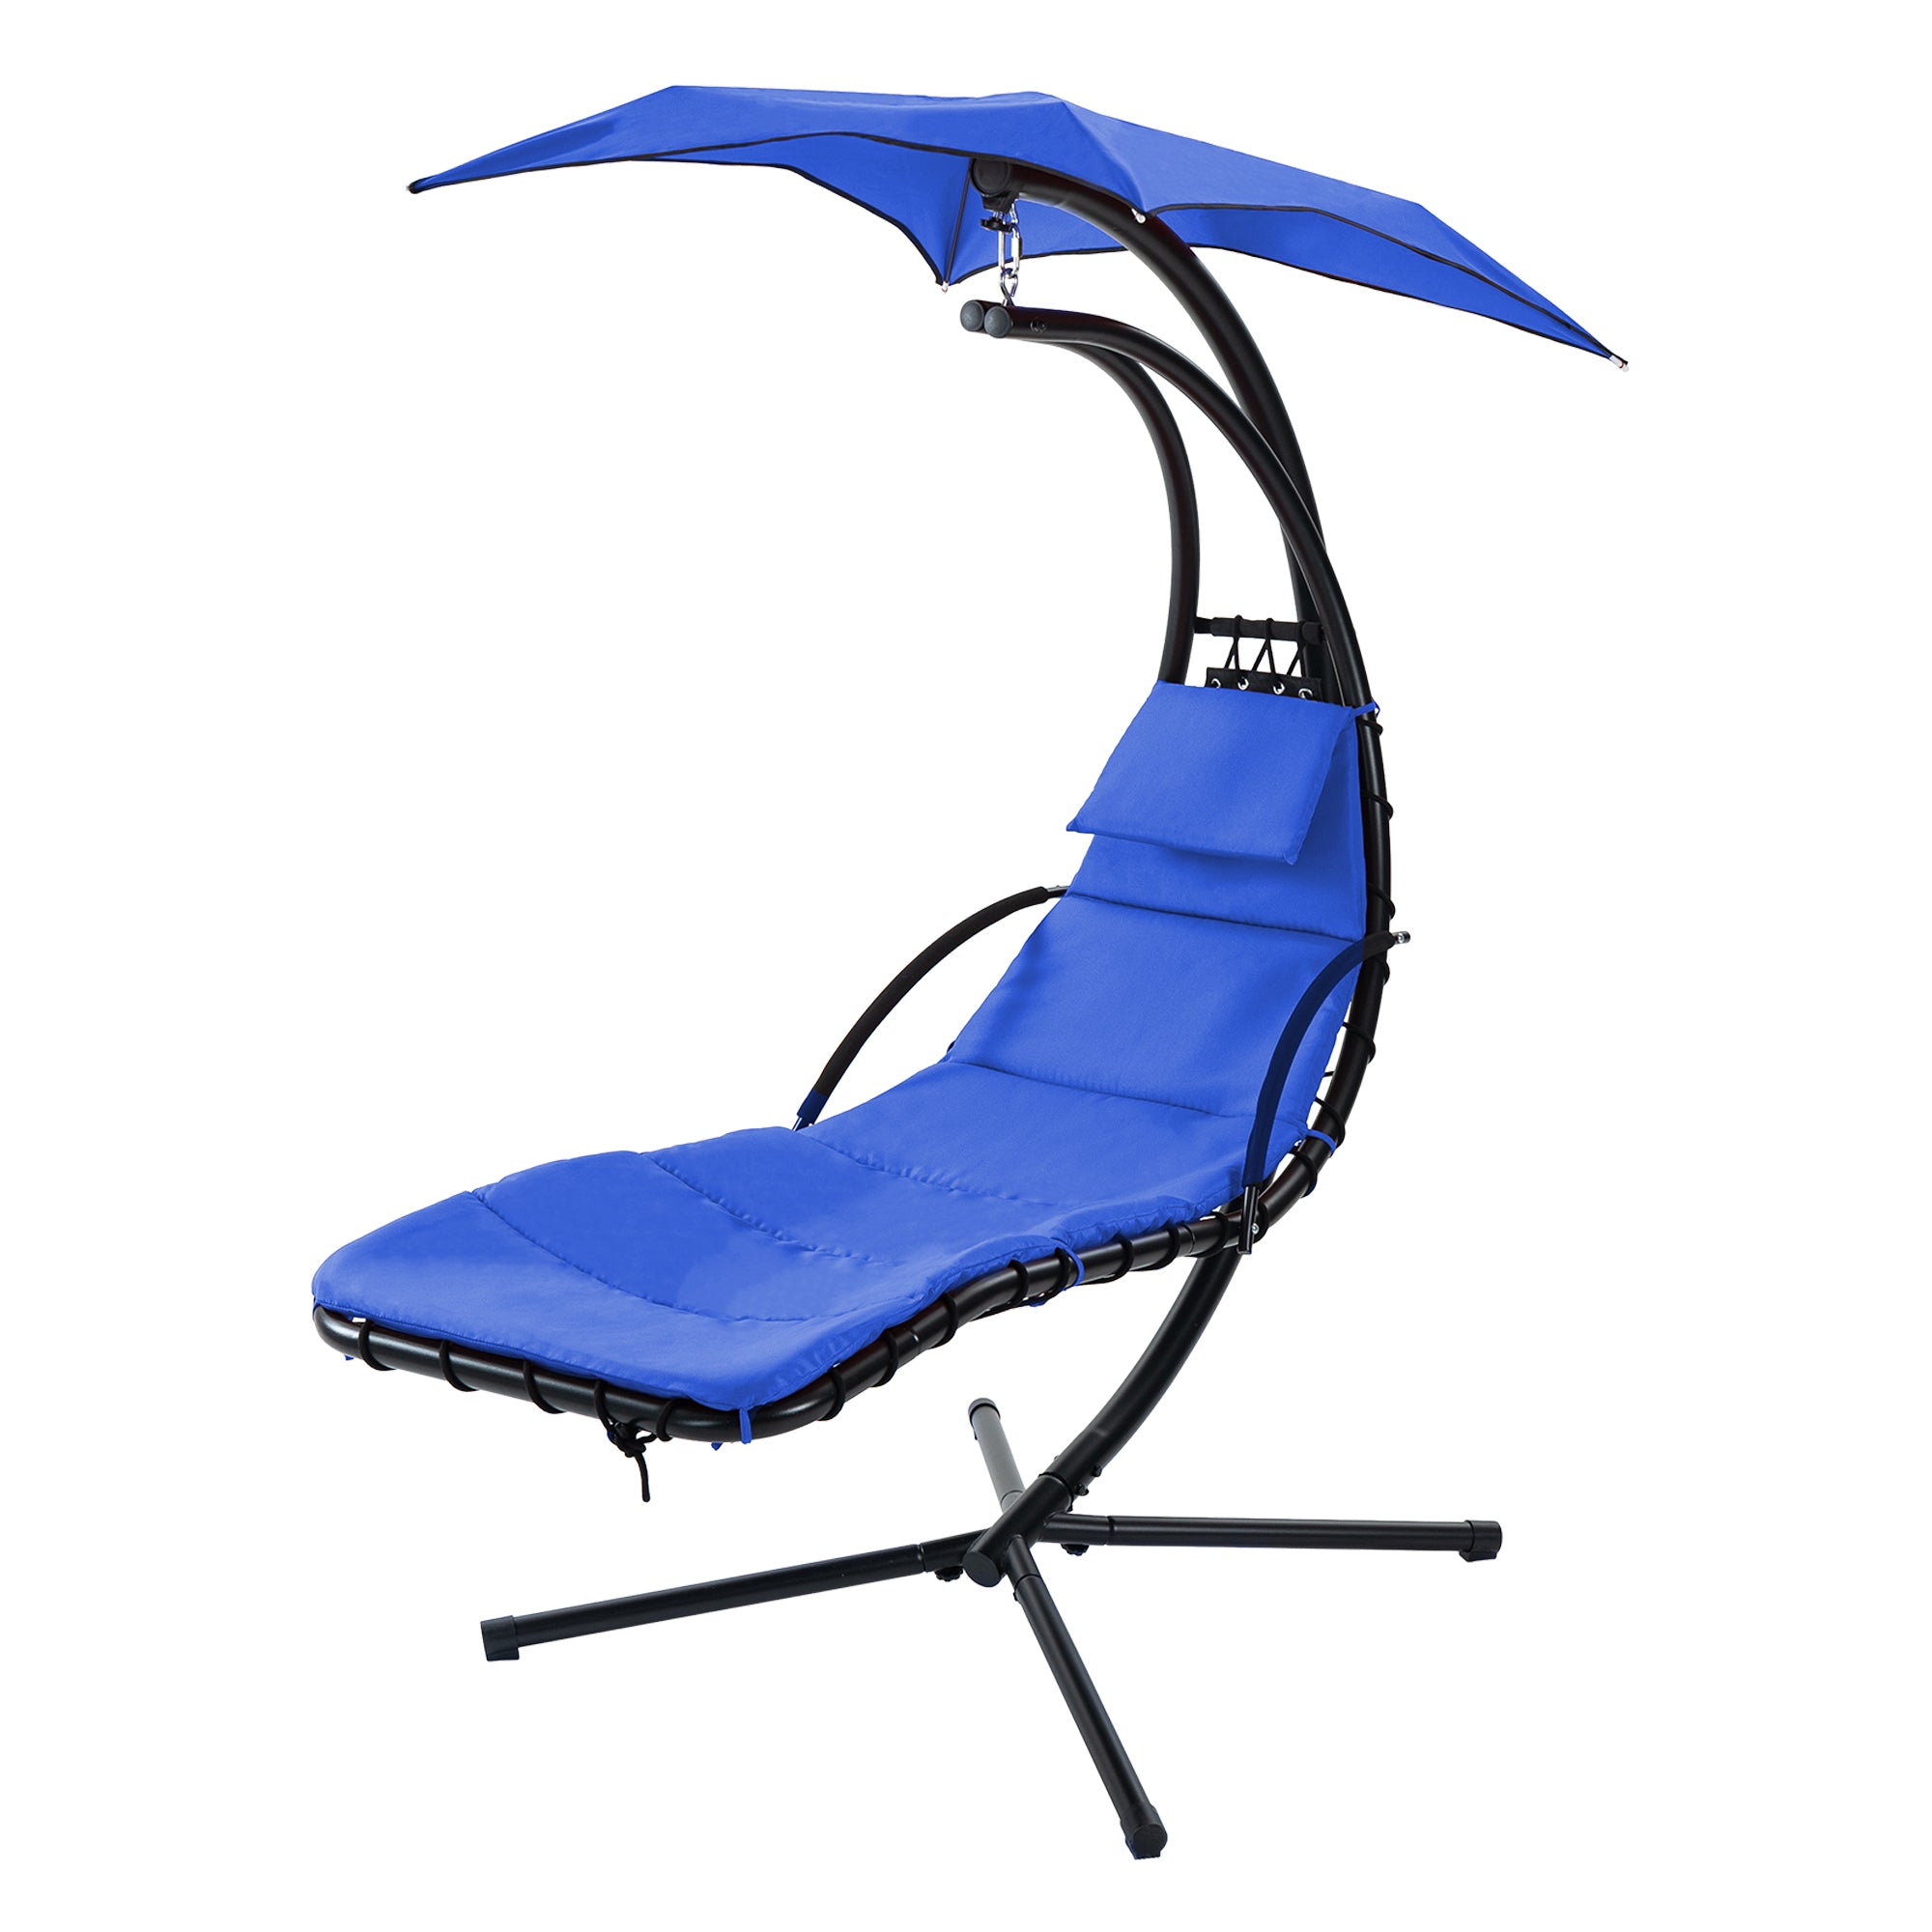 🆓🚛 Hanging Chaise Lounger With Removable Canopy, Outdoor Swing Chair With Built-In Pillow for Patio Porch Poolside, Hammock Chair With Stand, Blue